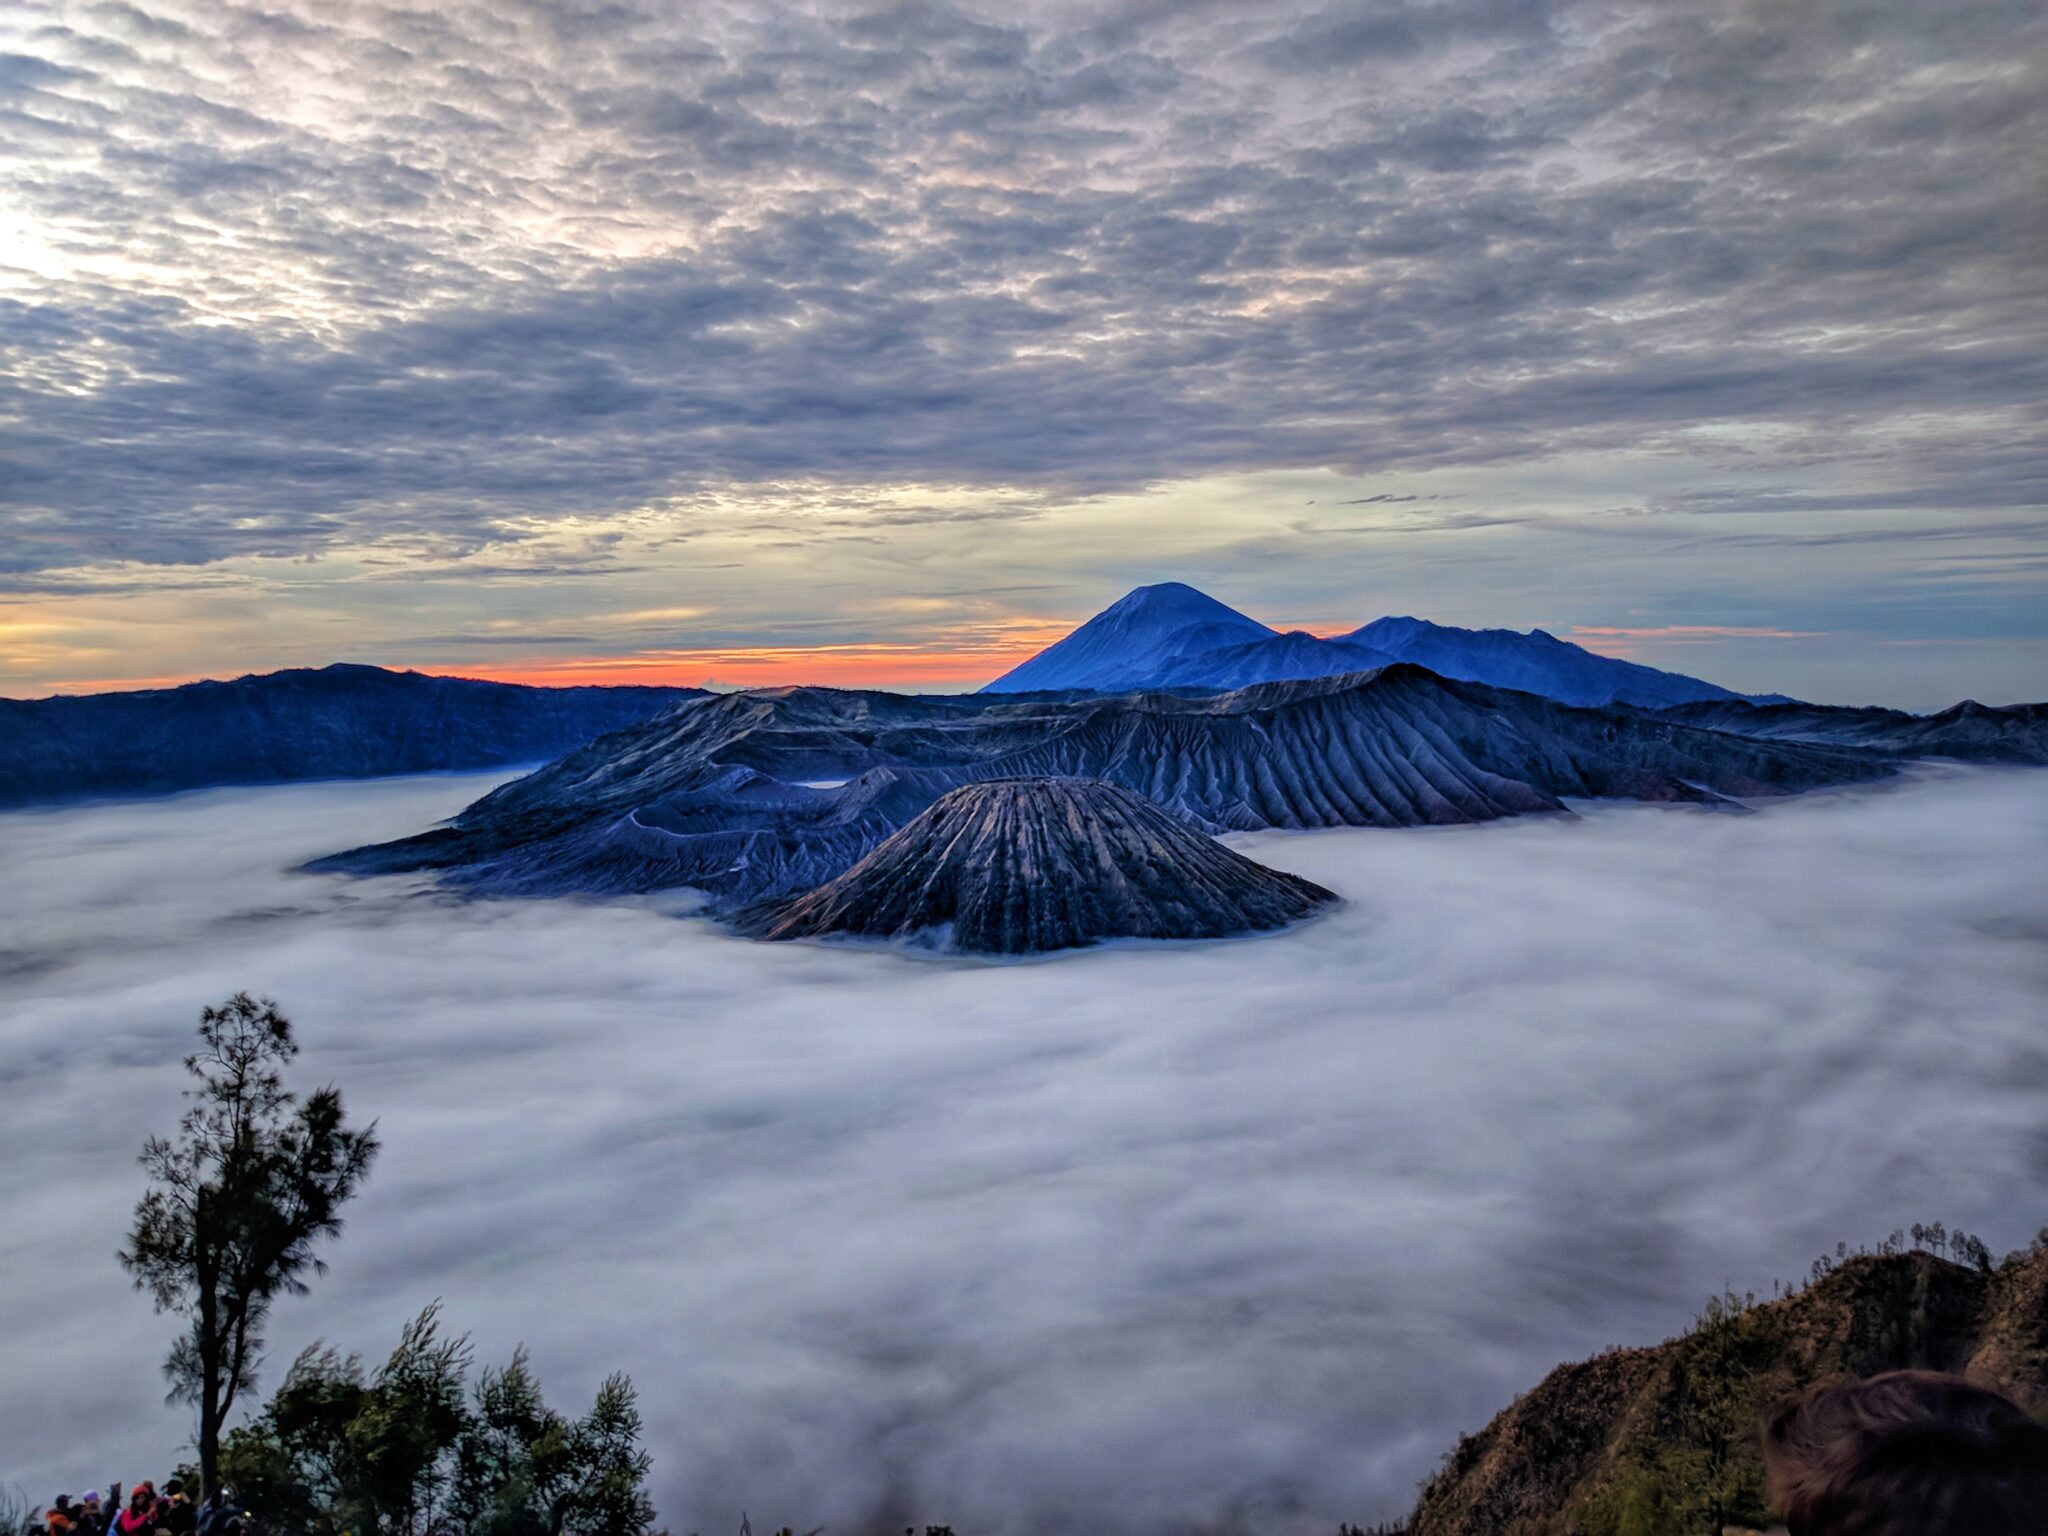 Mount Bromo Private Midnight Tour from Surabaya/Malang - Tourist Journey